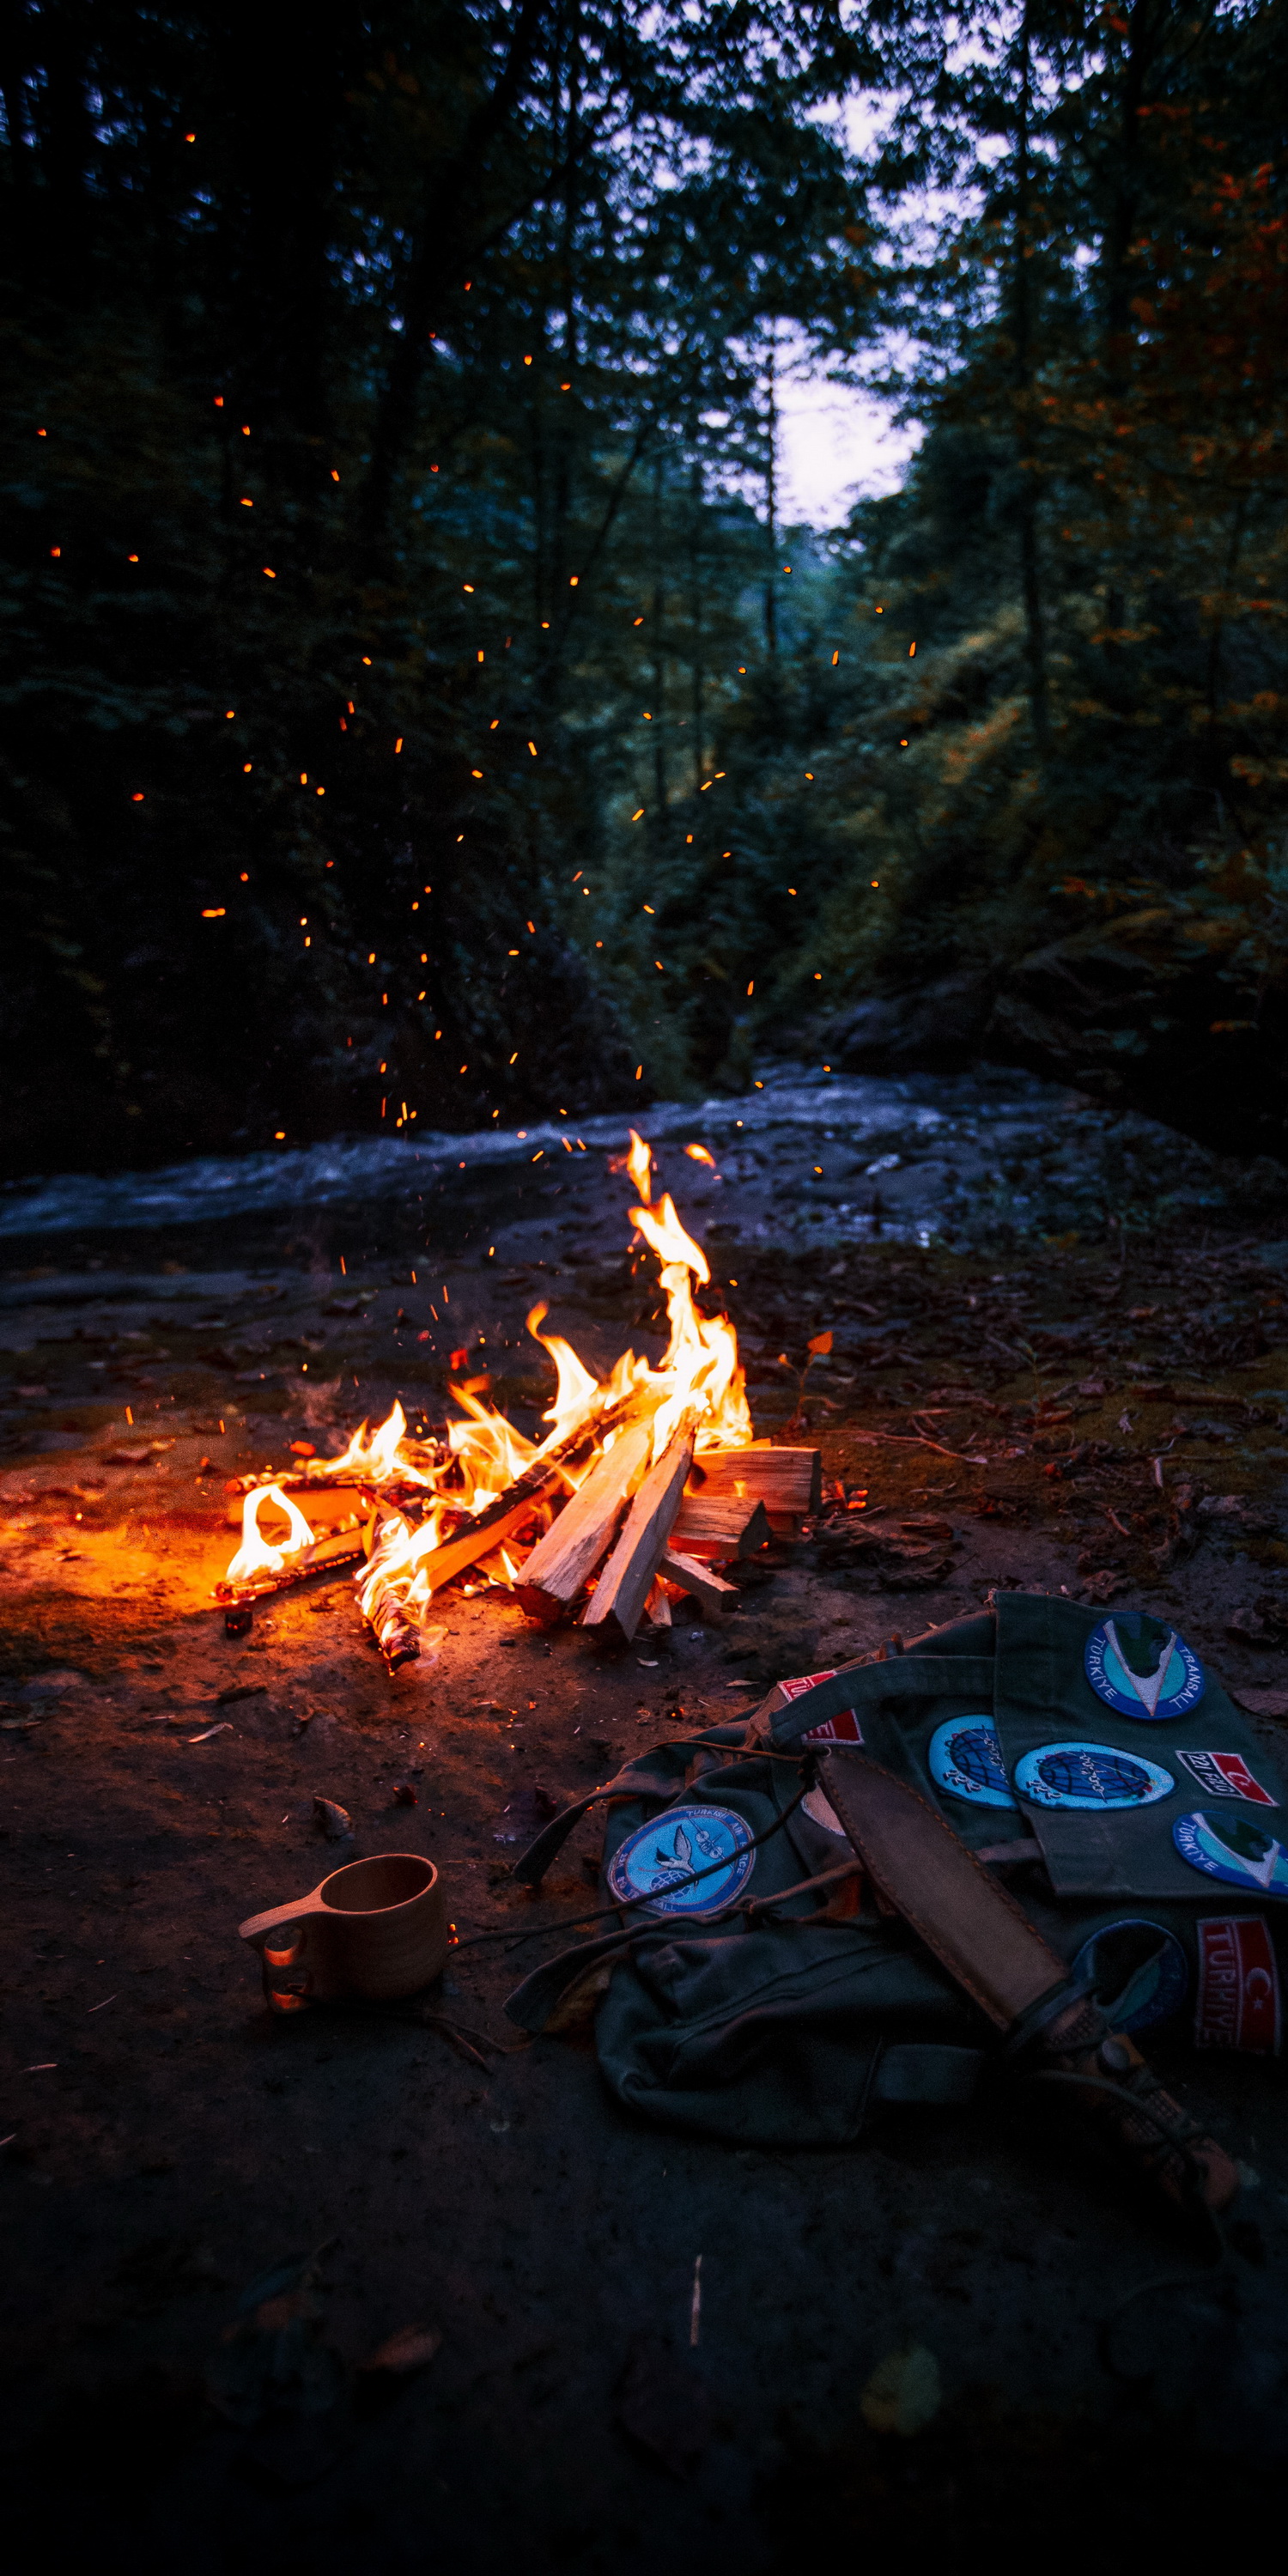 500 Camping Images HD  Download Free Images on Unsplash